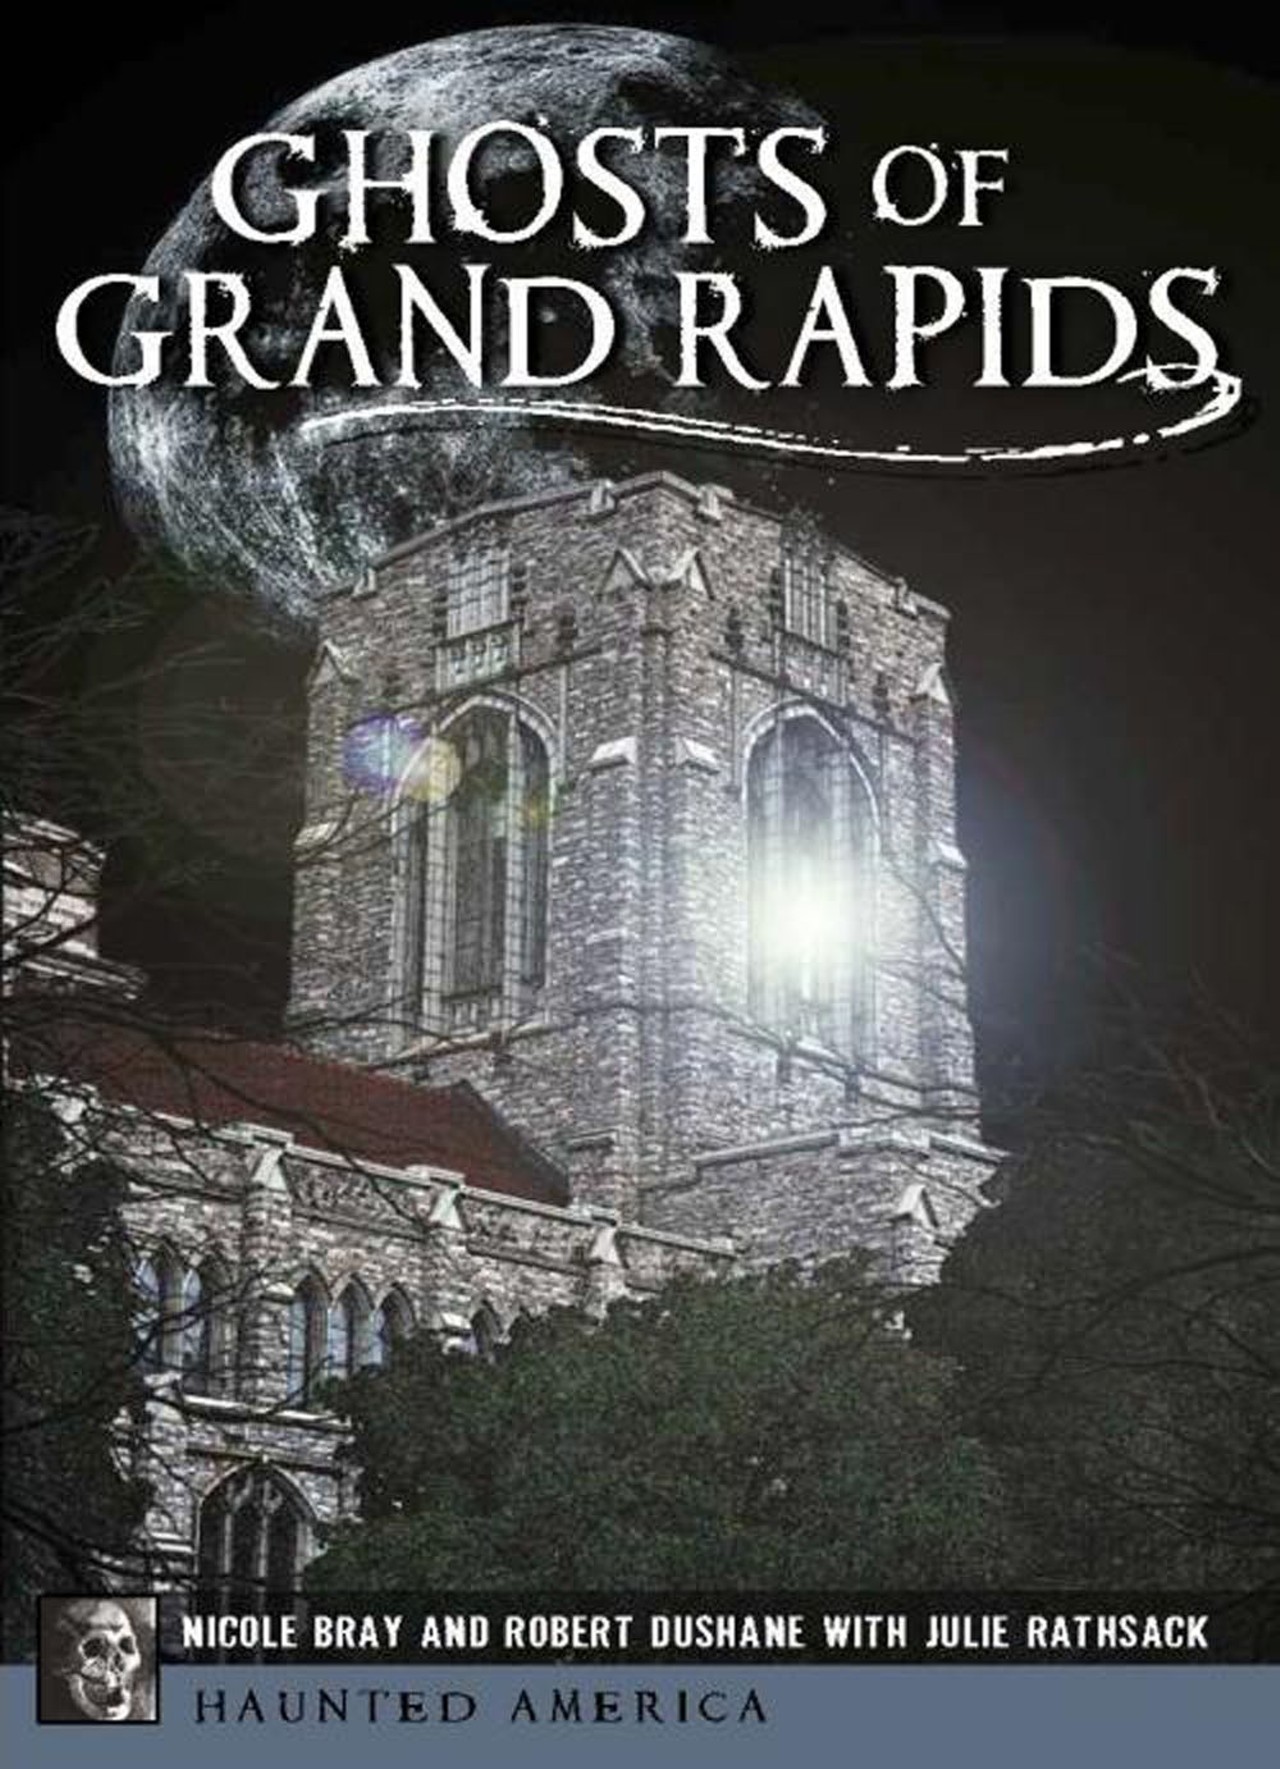 Ghosts of Grand Rapids
Grand Rapids people, this one is for you! Take a walking tour of the haunted areas of Grand Rapids. History and exercise &#151; nothing better! Tickets are $10. www.ghostsofgrandrapids.com